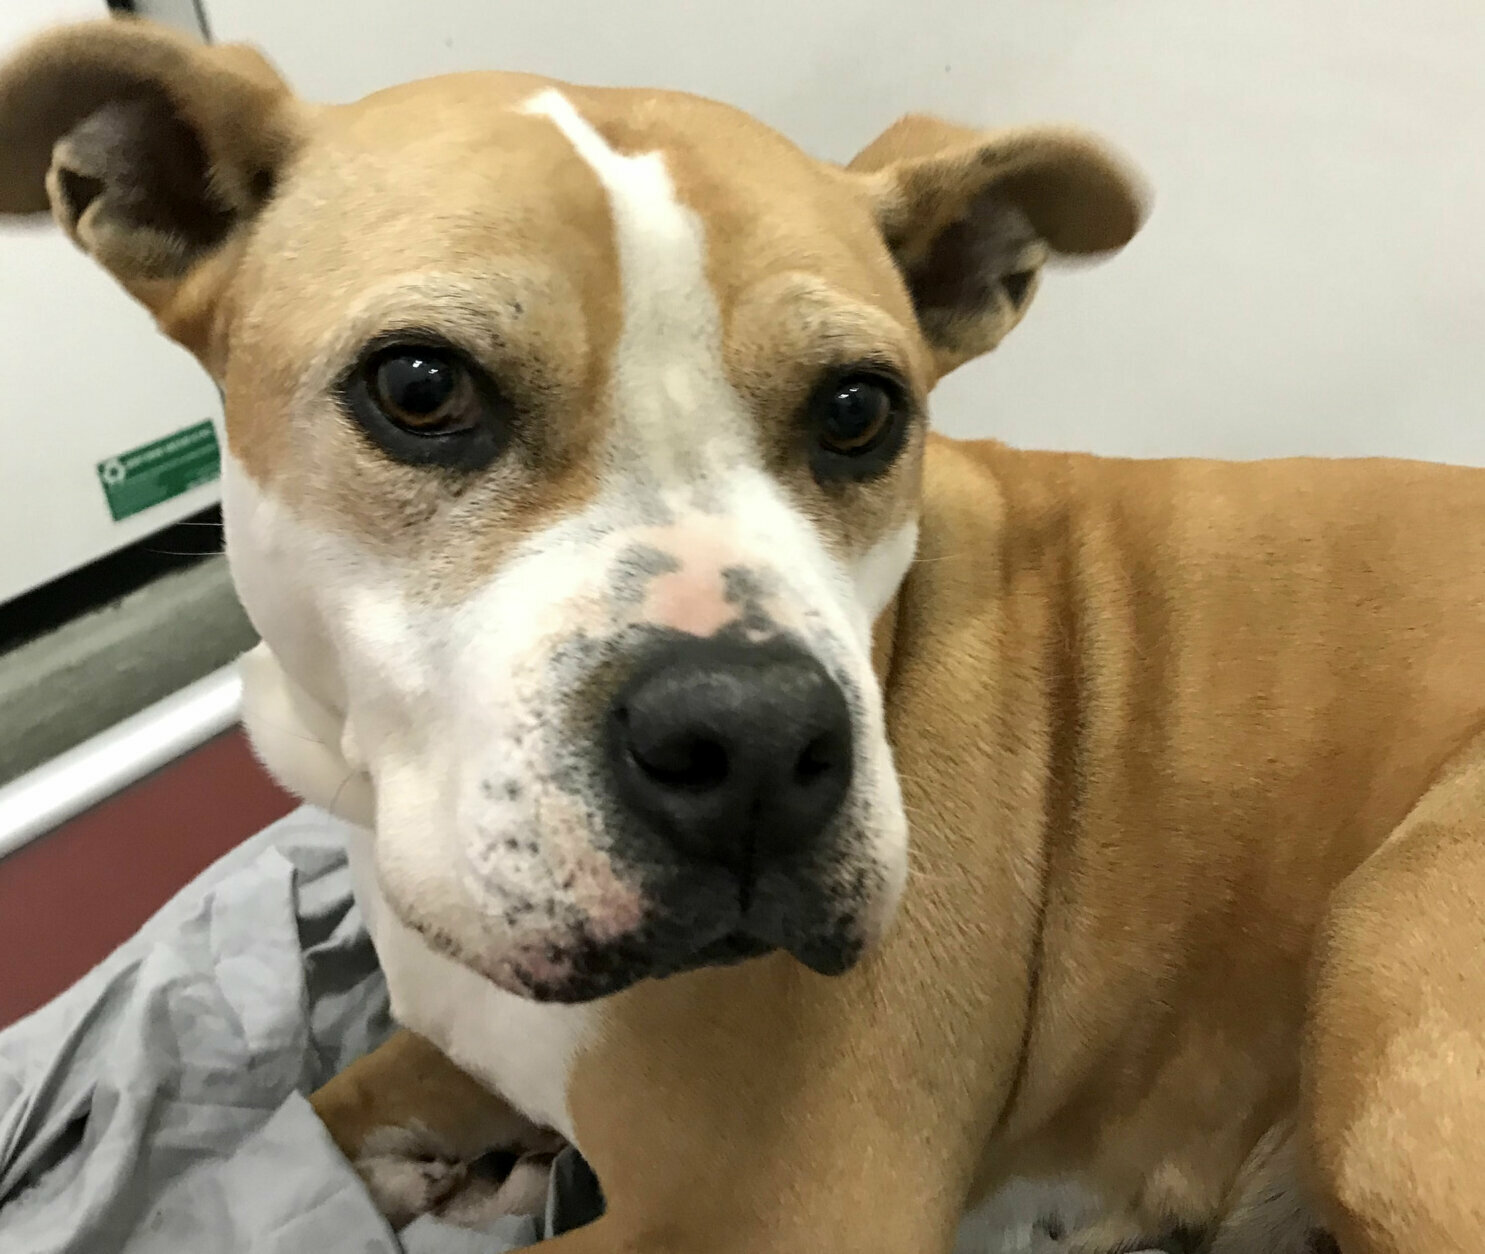 <p><strong>Pet of the Week: Darla</strong></p>
<p>Are you looking for a darling senior pup to add to your family? Look no further than 10-year-old Darla. Darla has quickly become a favorite of HRA’s staff and volunteers and we’d love to help this friendly, social girl find a new home. Darla has lived previously with young children and enjoys playing fetch and getting all the pets she can get. As an added bonus, Darla’s adoption fee is waived for adopters over 50 as part of HRA’s Boomer’s Buddies program. Meet, adopt, and go home with Darla from the Humane Rescue Alliance Oglethorpe Street adoption center.</p>
